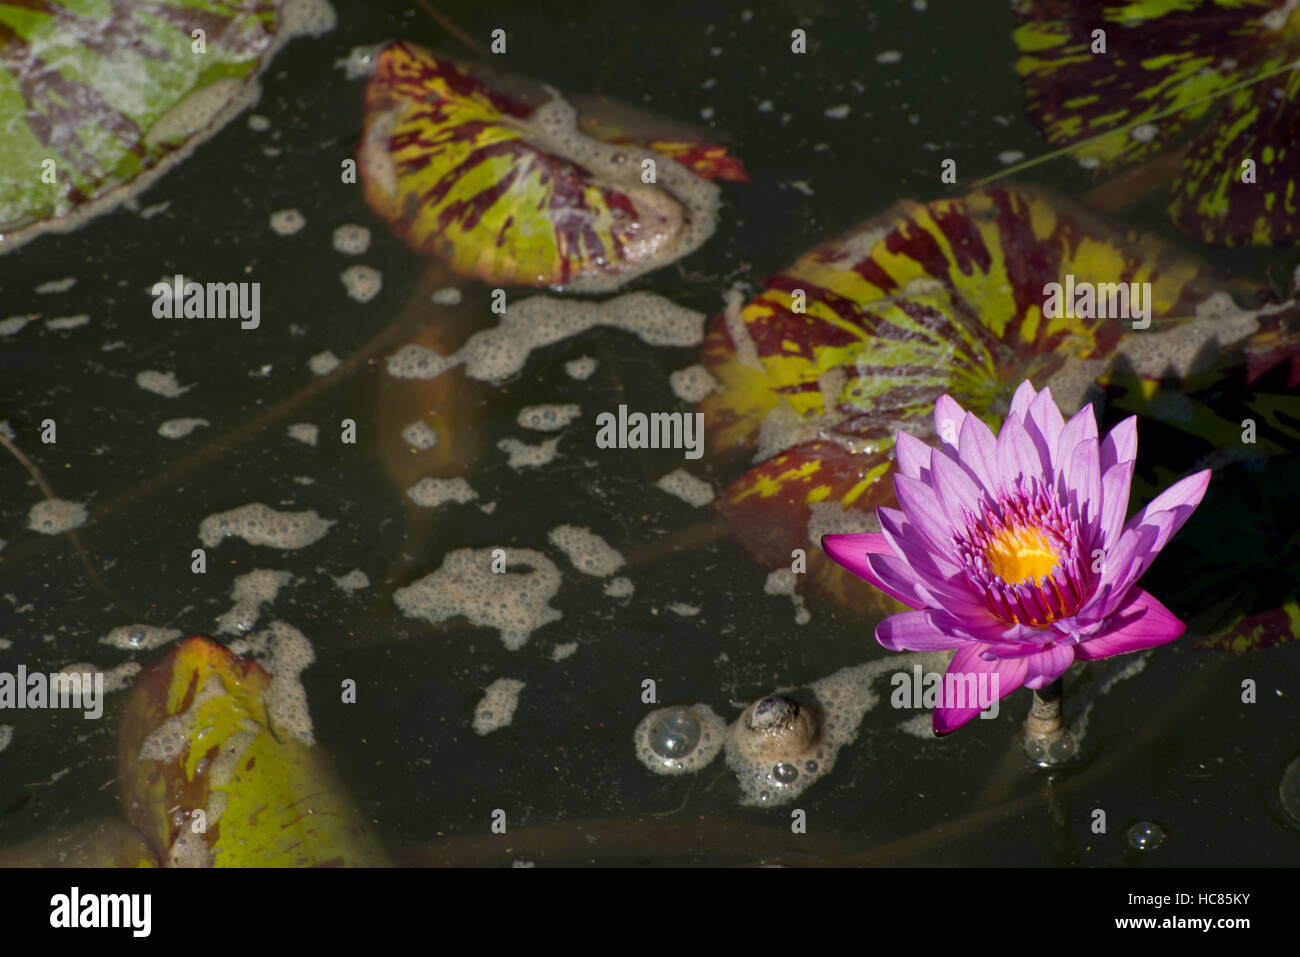 Photograph of Pink/Purple Egyptian Lotus water lily and lily pads in a pond. Stock Photo